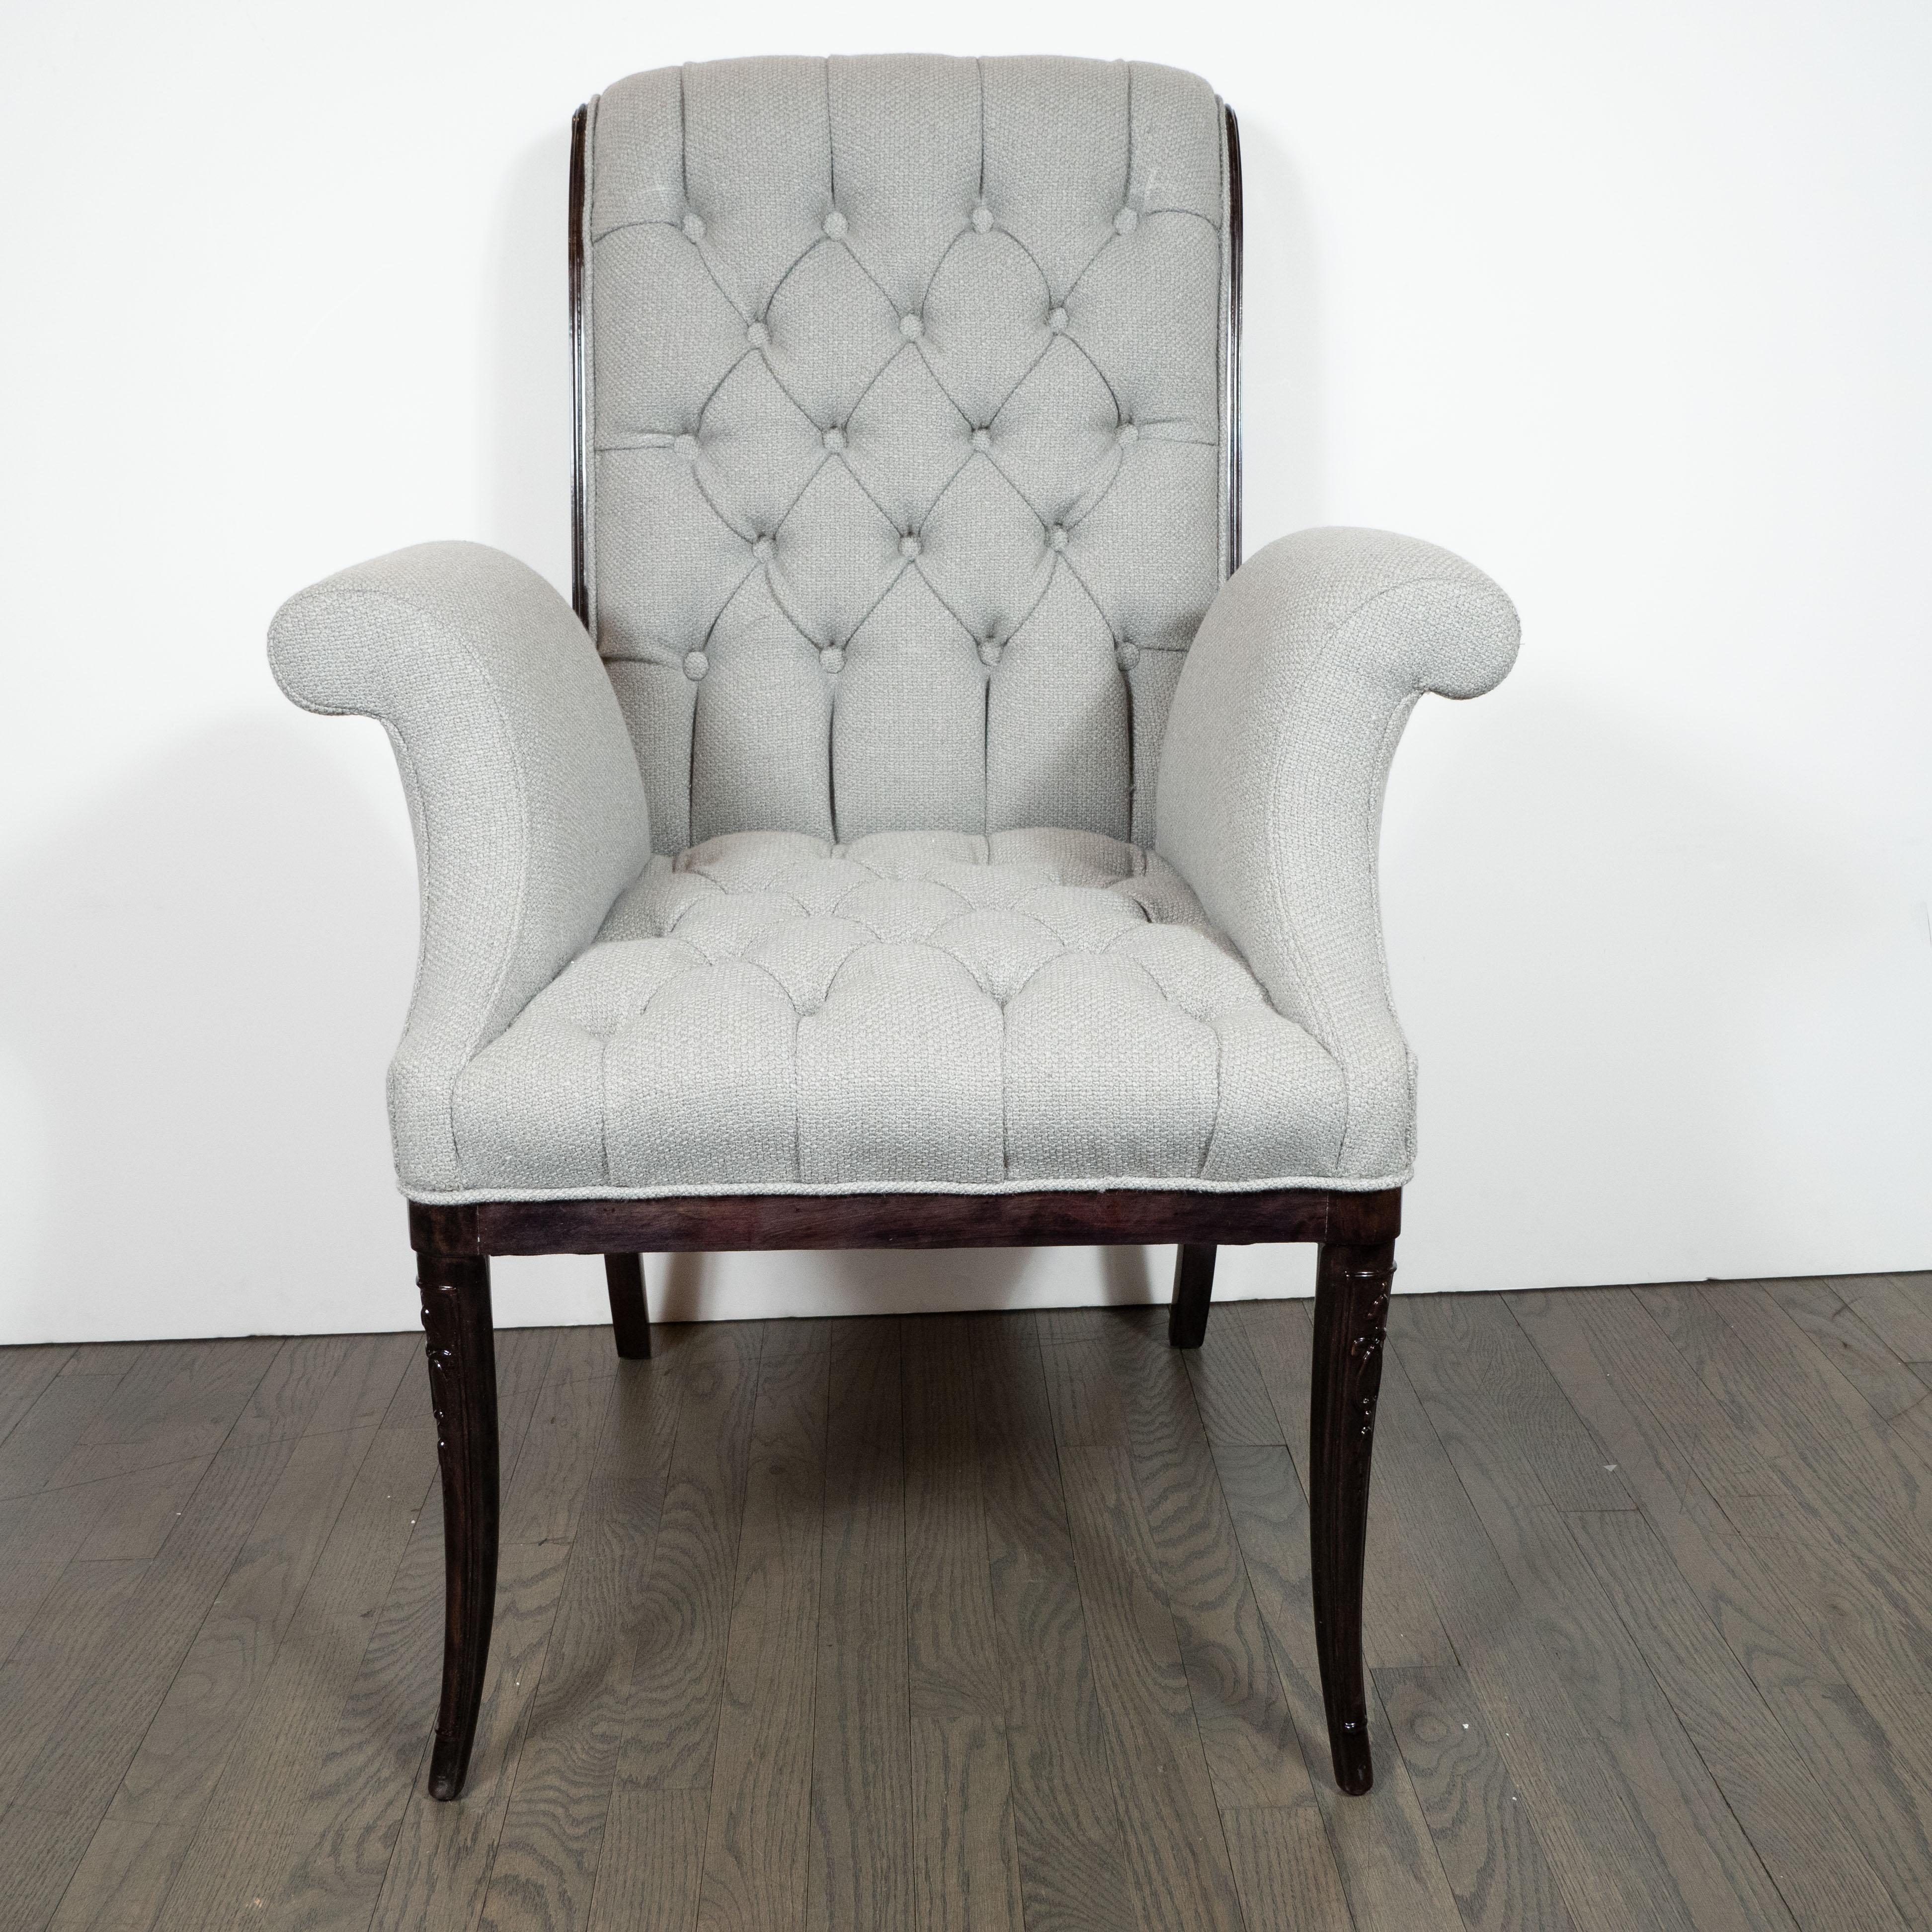 This elegant pair of Hollywood/ Art Deco side chairs were realized by the illustrious 20th Century design firm, Grosfeld House- where luminaries such as Lorin Jackson refined their practice- in the United States, circa 1940. They feature tufted